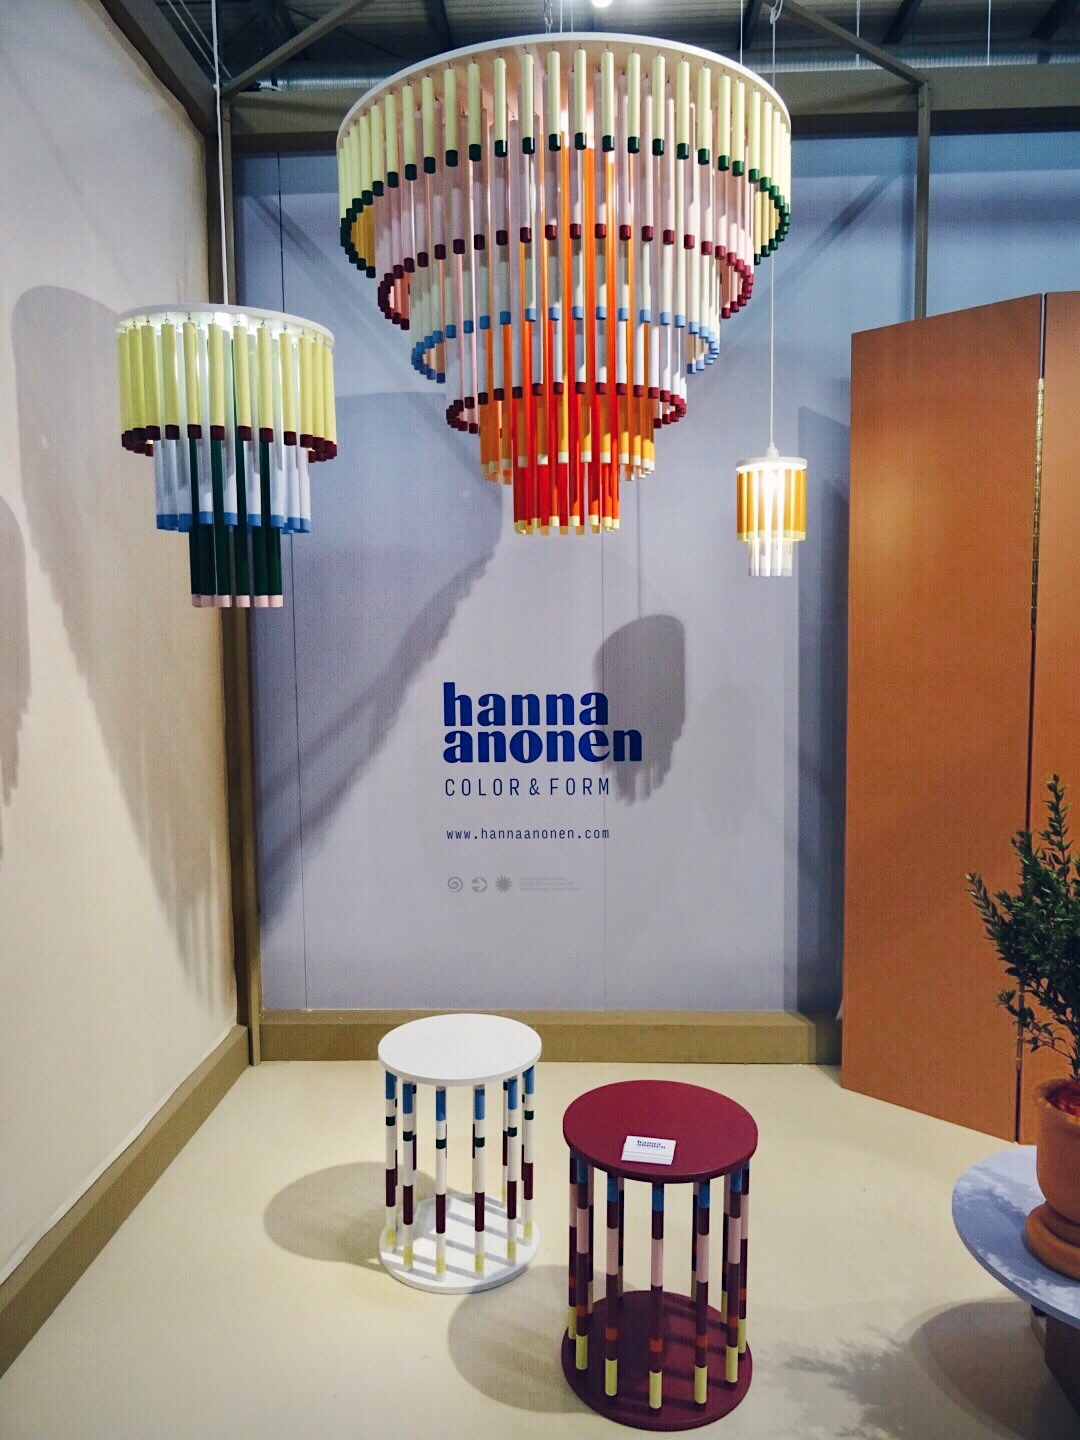 Hanna Anonen Cocktail ceiling lamp and Merry-go-round tables